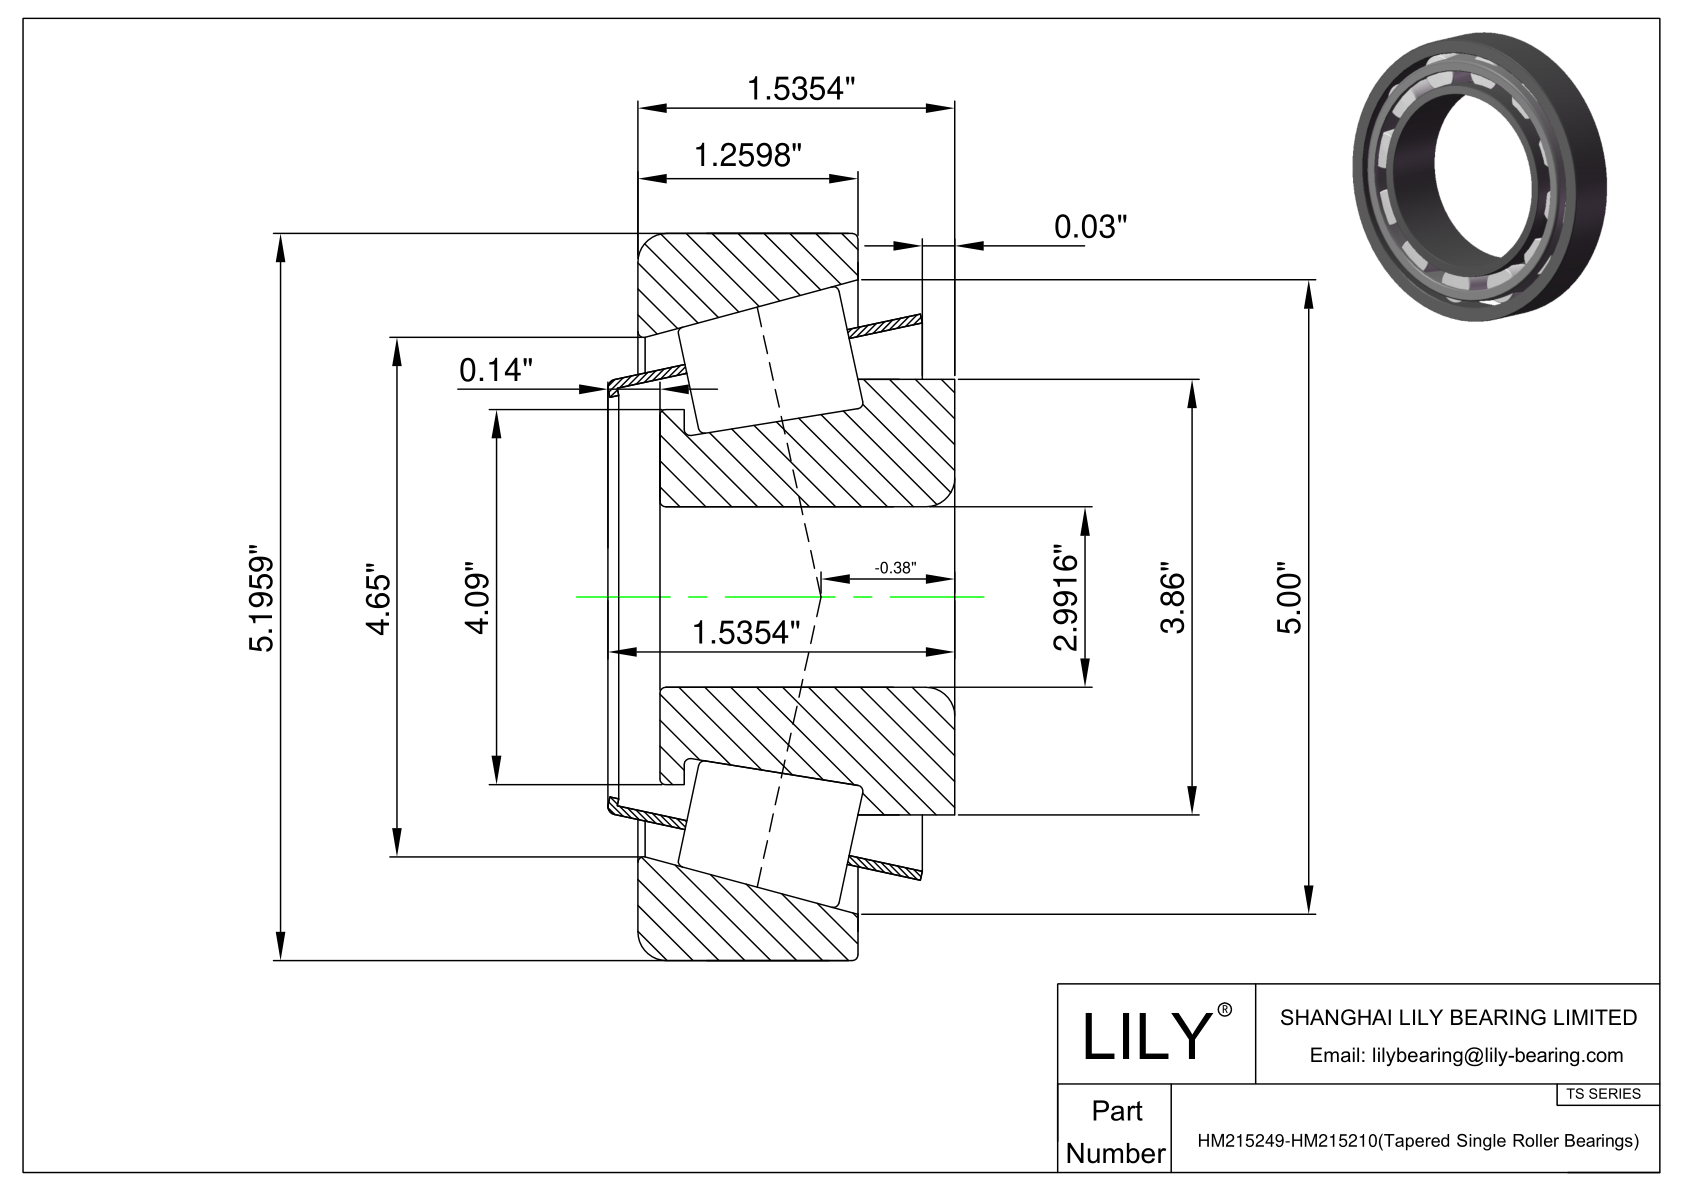 HM215249-HM215210 TS (Tapered Single Roller Bearings) (Imperial) cad drawing